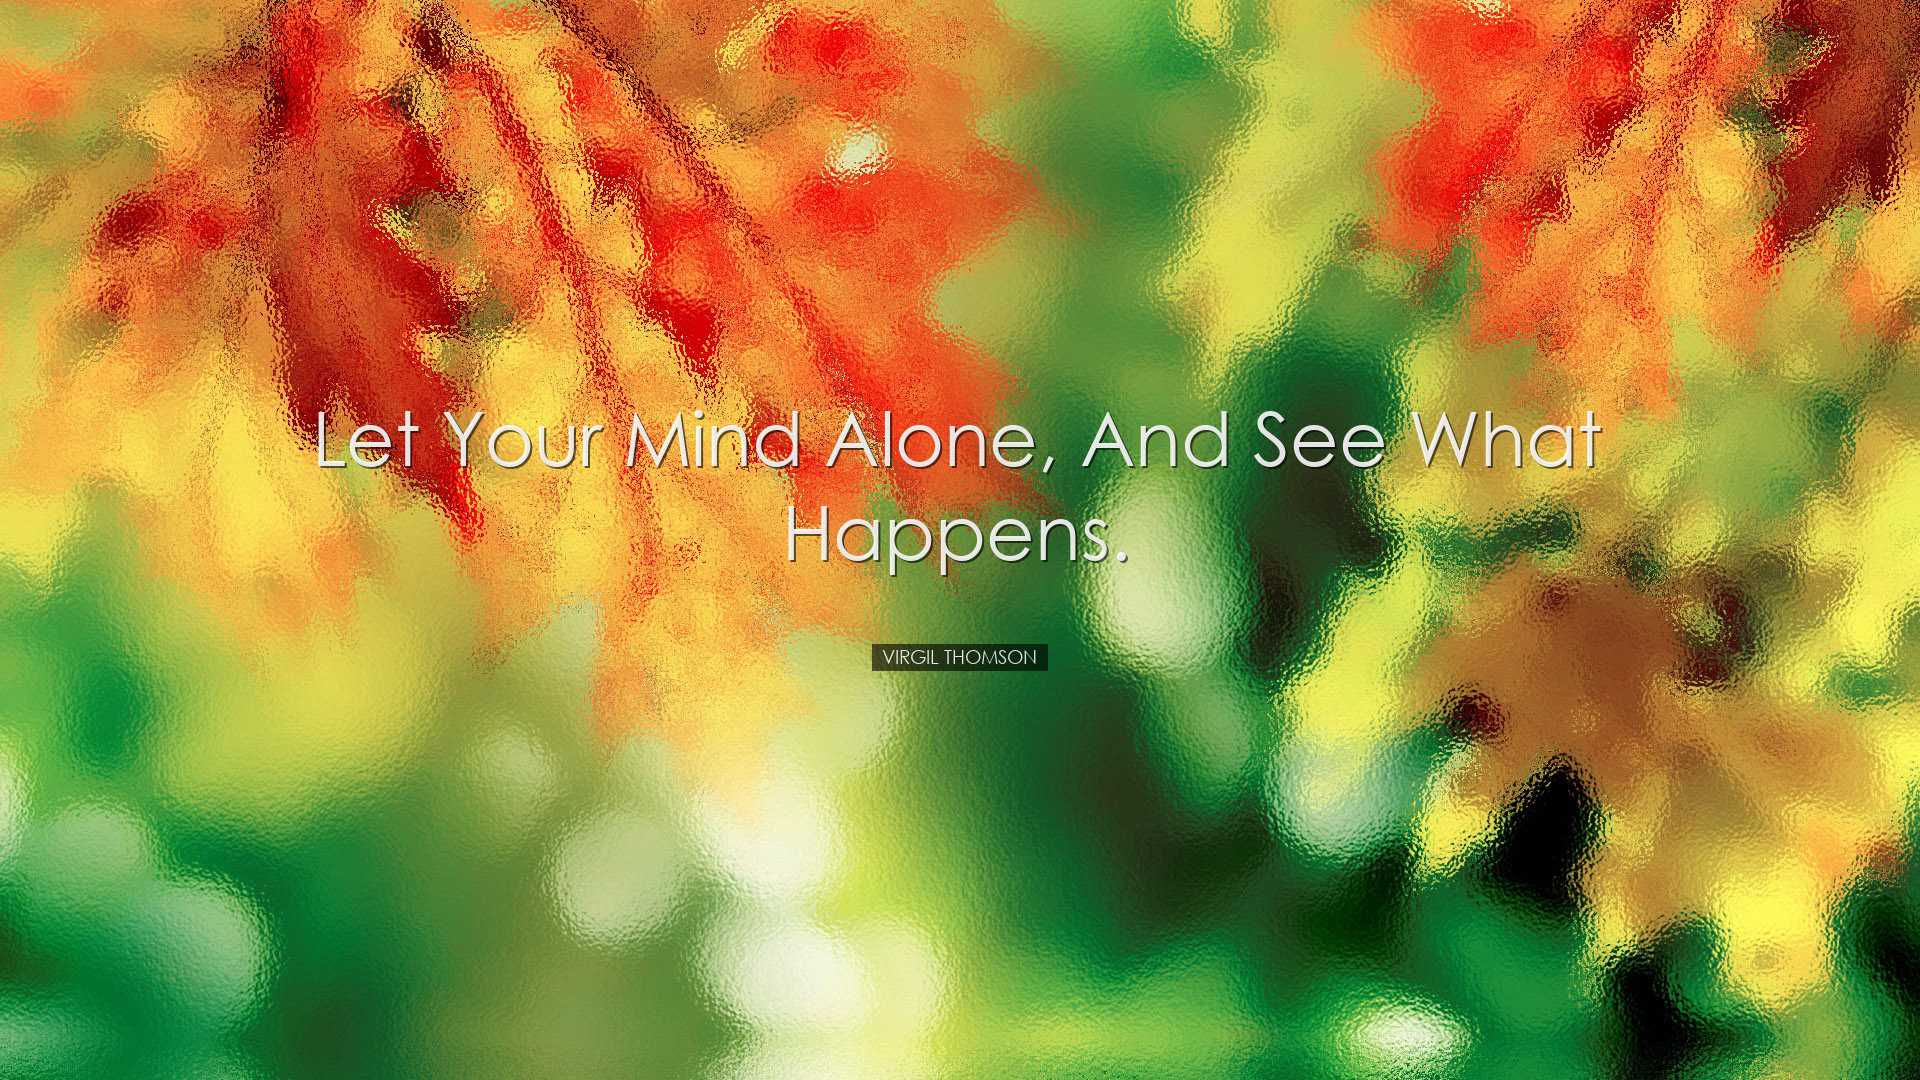 Let your mind alone, and see what happens. - Virgil Thomson